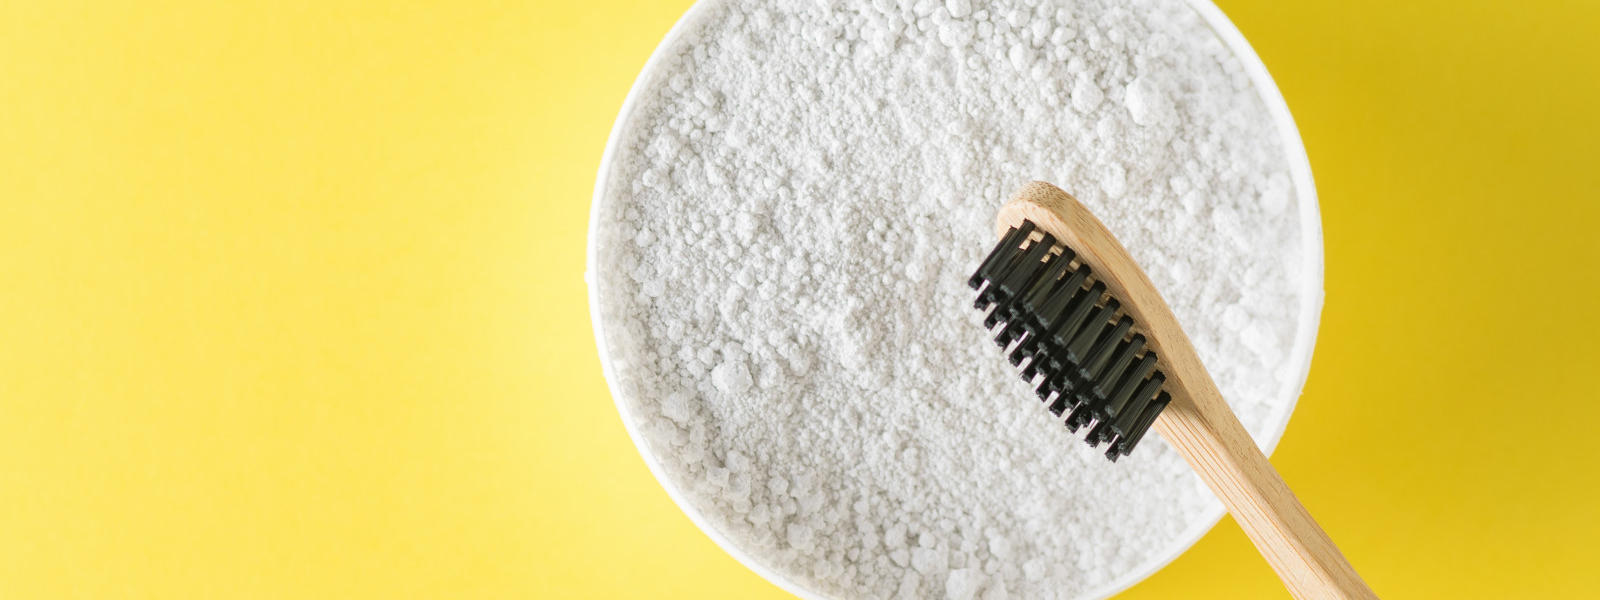 Photo of baking soda and a toothbrush